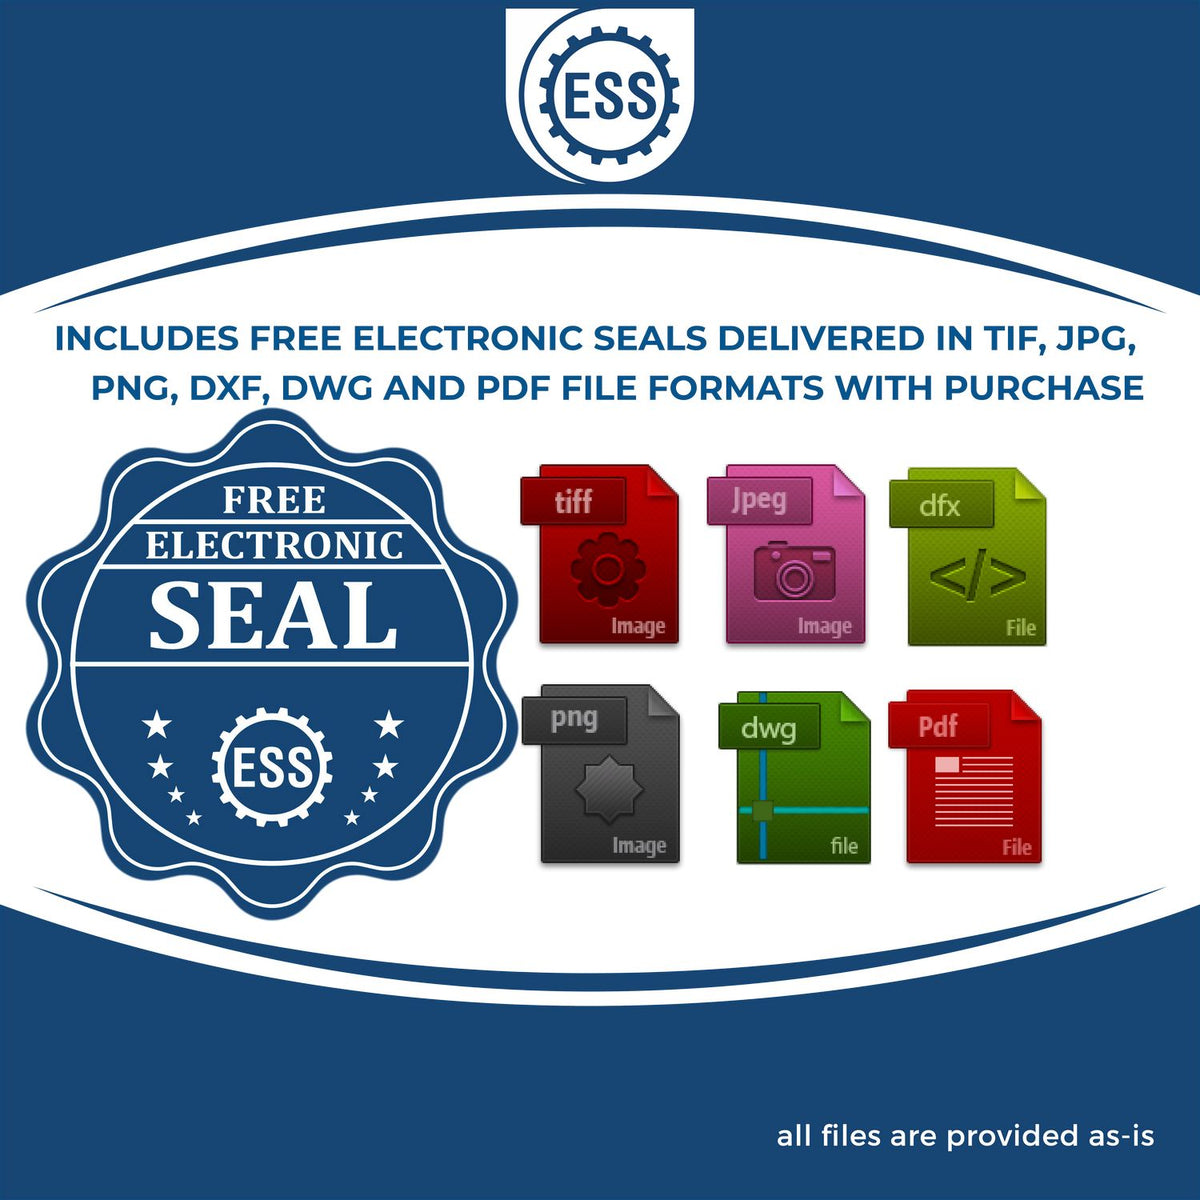 An infographic for the free electronic seal for the MaxLight Premium Pre-Inked New York State Seal Notarial Stamp illustrating the different file type icons such as DXF, DWG, TIF, JPG and PNG.